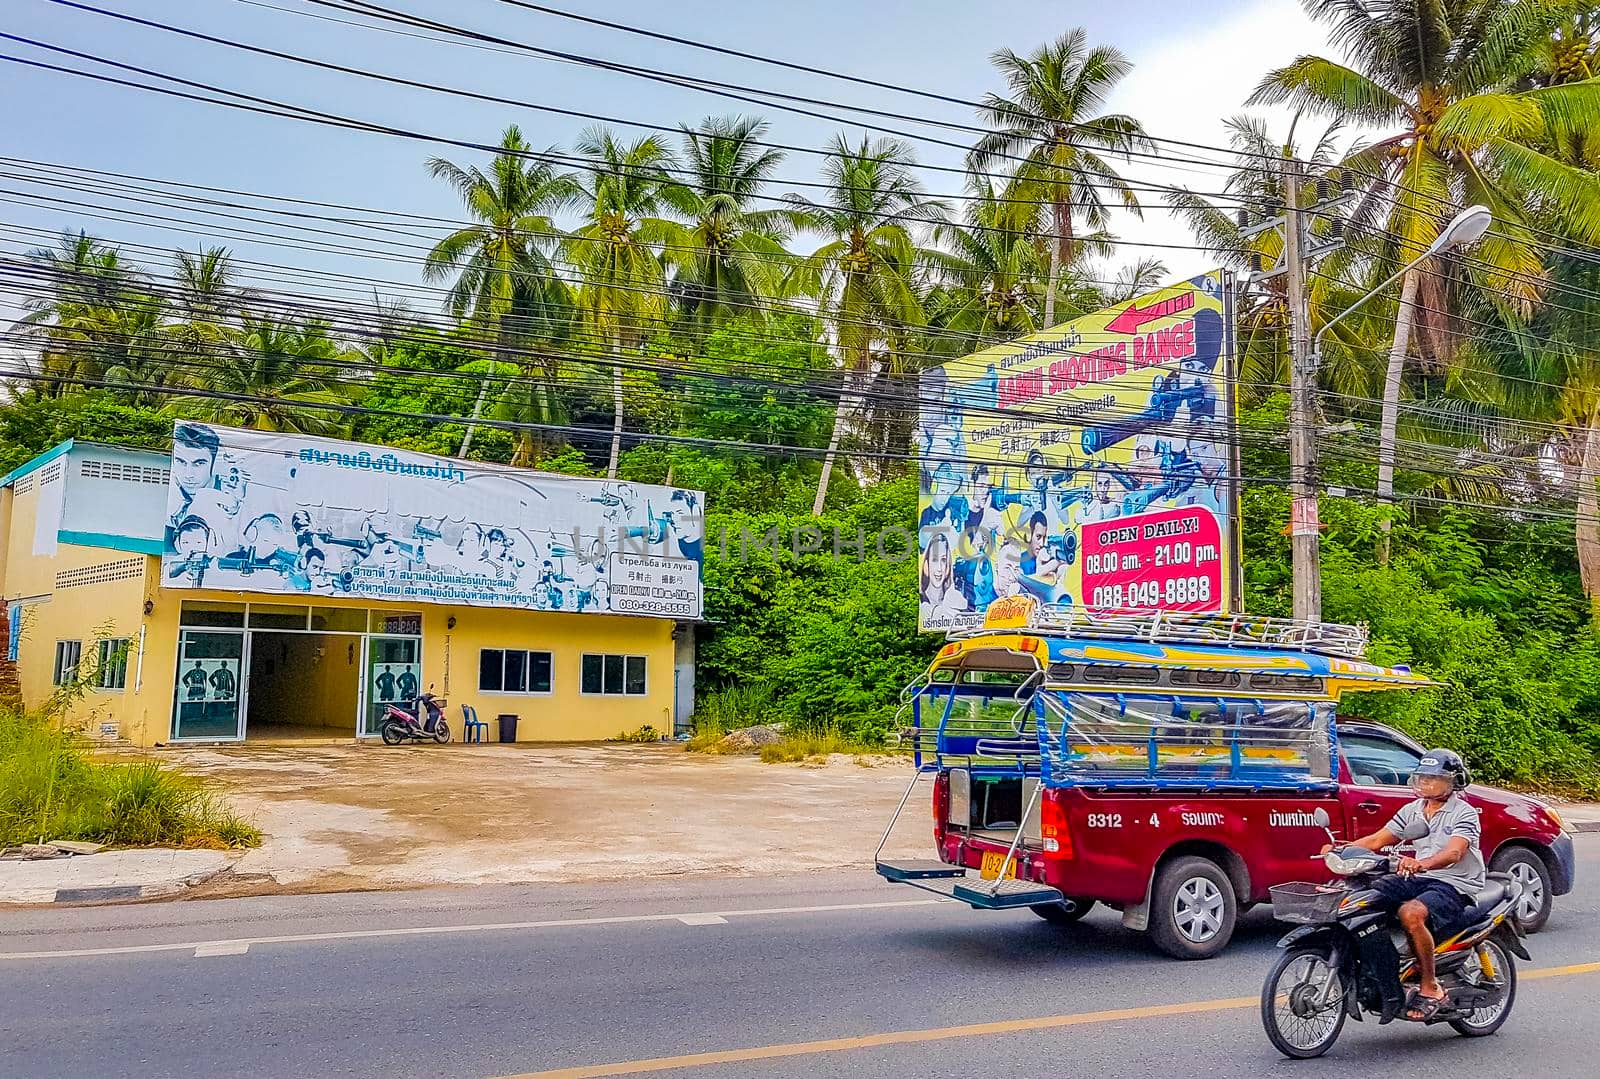 Koh Samui Thailand 25. May 2018 Typical colorful street road with markets shops restaurants buildings cars and people in Bo Phut on Koh Samui island in Surat Thani Thailand.